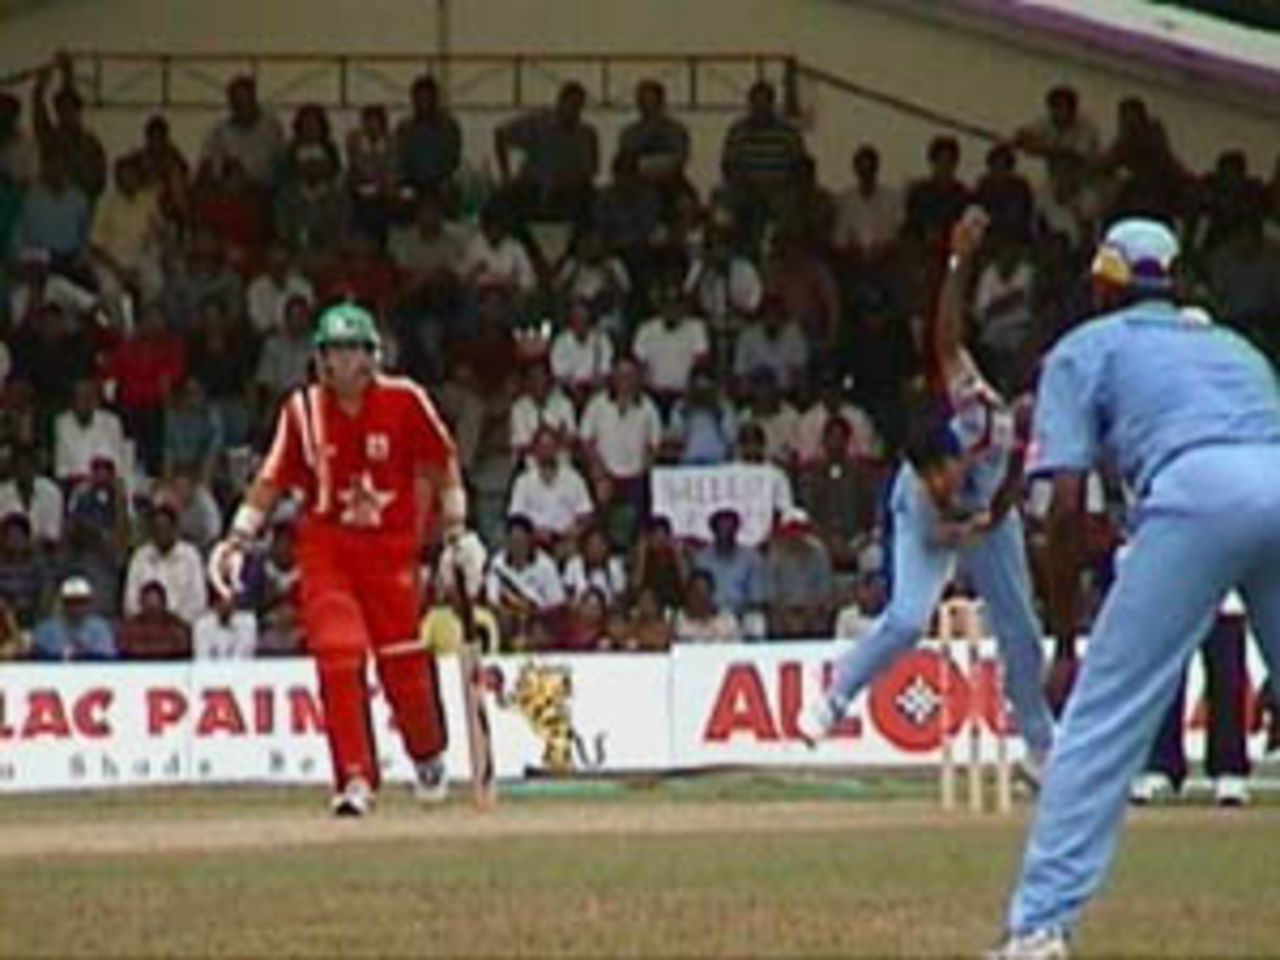 Prasad after releasing his delivery, India v Zimbabwe (2nd ODI), Coca-Cola Singapore Challenge, 1999-2000, Kallang Ground, Singapore, 4 Sep 1999